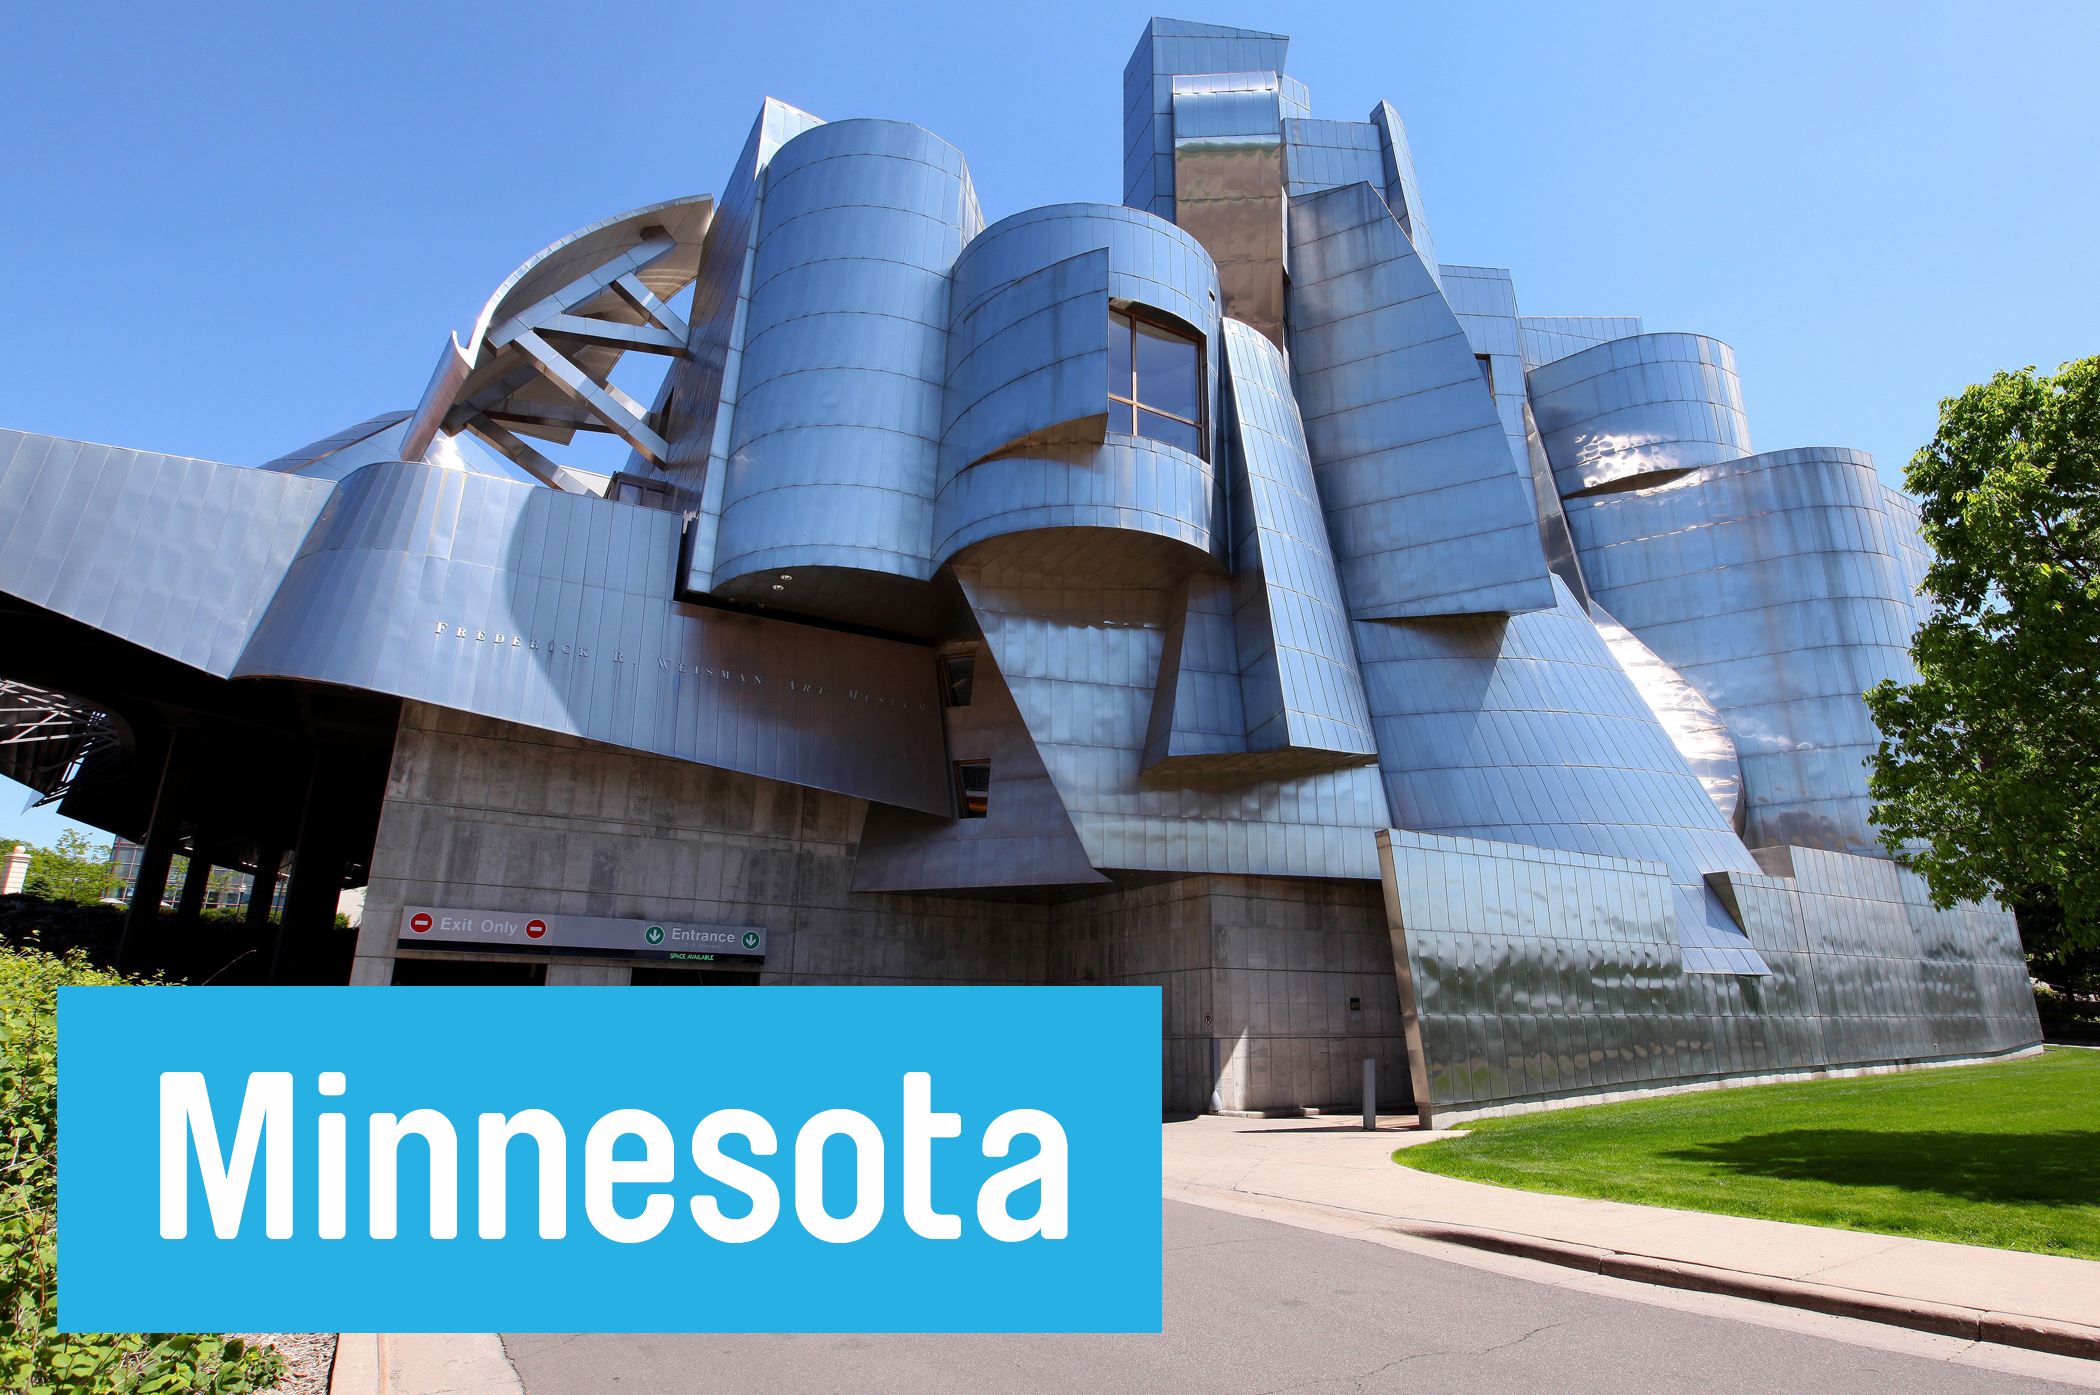 Step inside a starchitect’s masterwork at Frank Gehry’s <a href="http://www.weisman.umn.edu/" target="_blank">Weisman Art Museum</a>. Among the current exhibits: Andy Warhol’s pop prints of the American West.